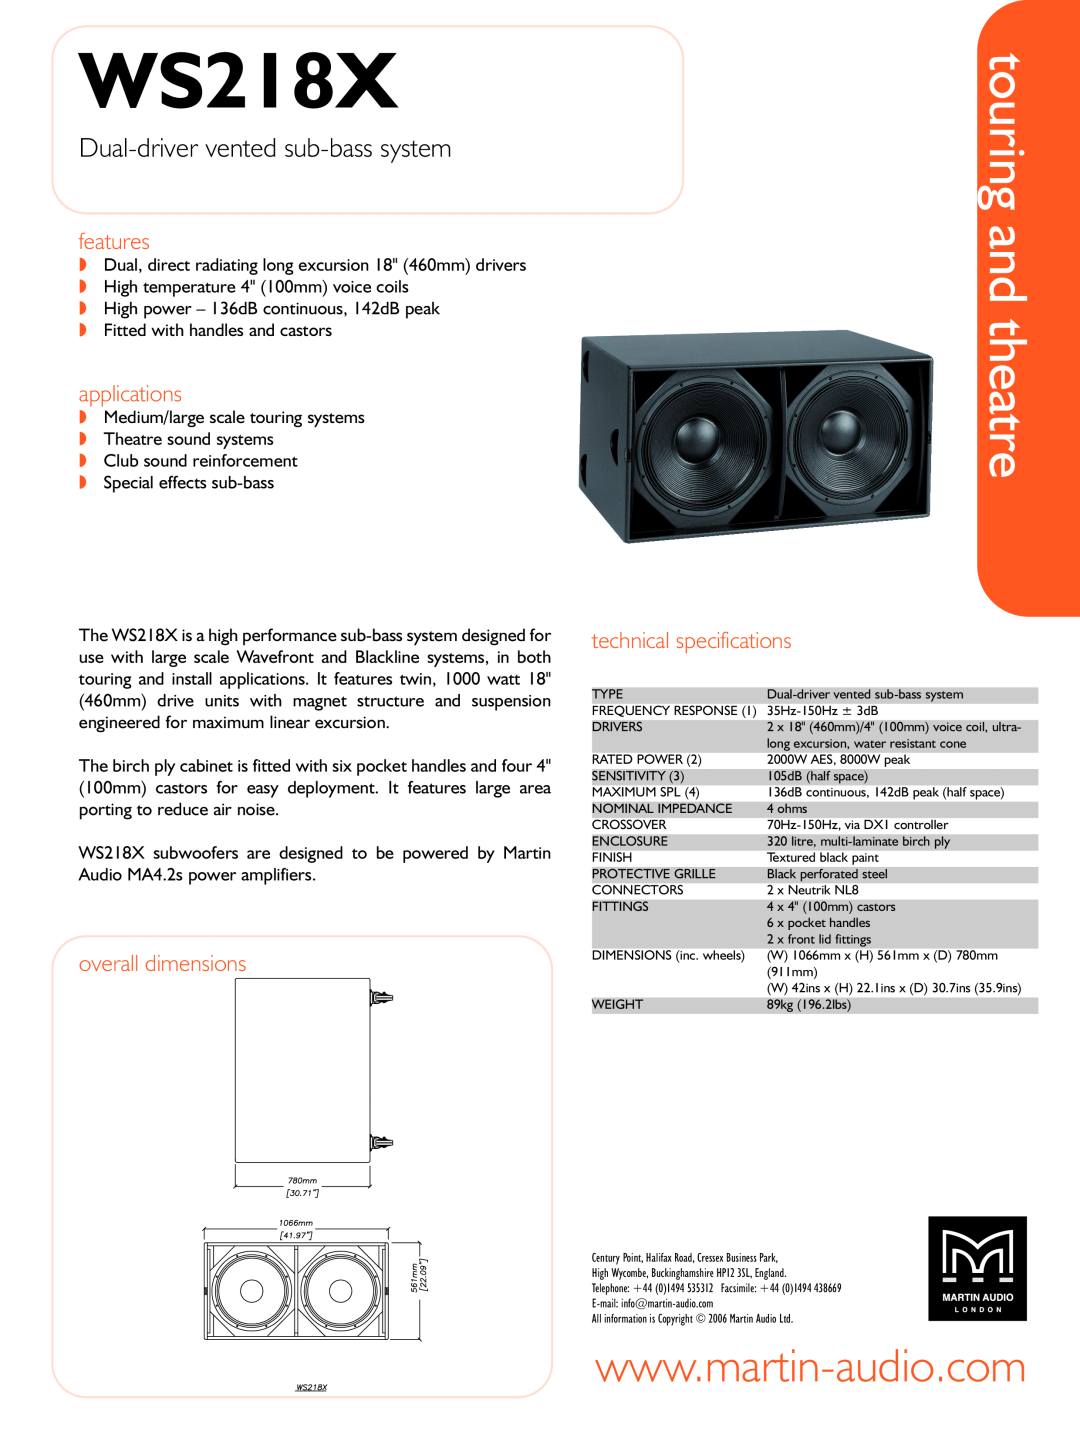 Martin Audio WS218X technical specifications Dual-drivervented sub-basssystem, features, applications, overall dimensions 